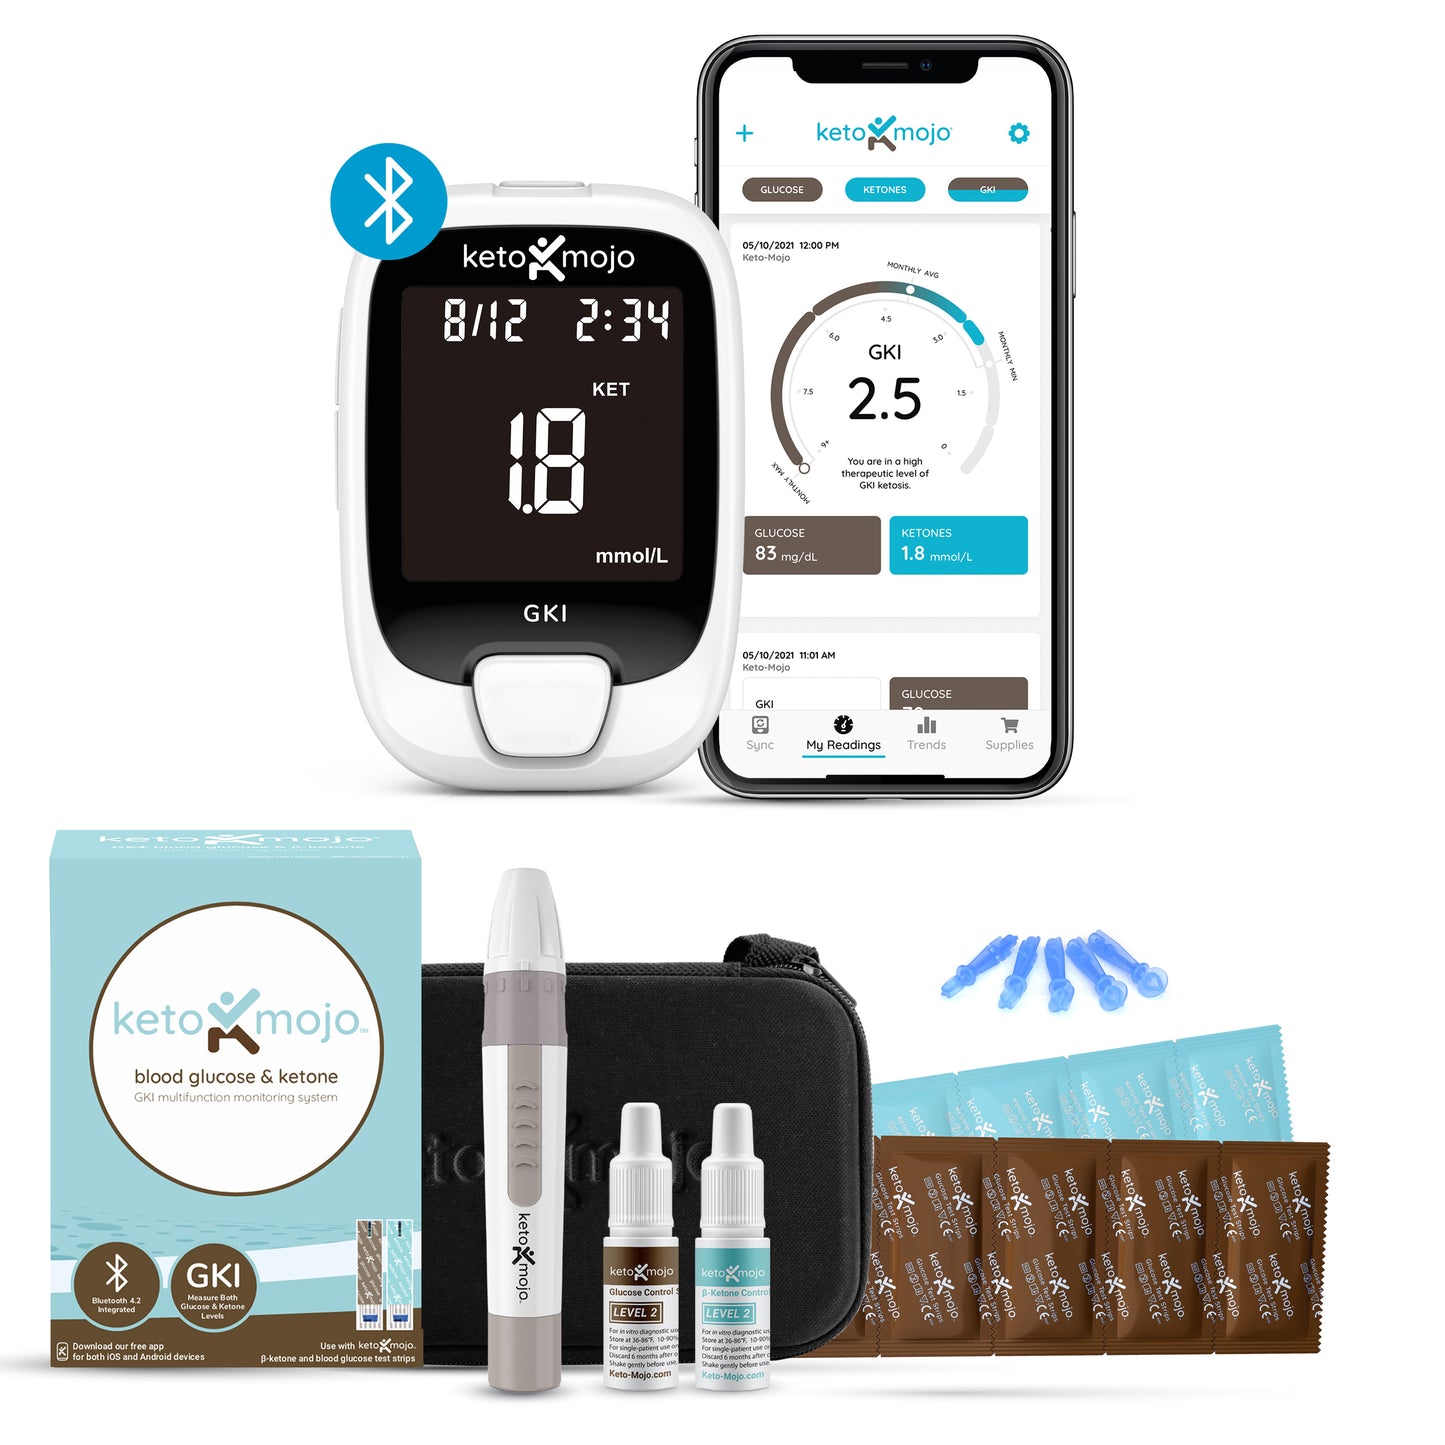 Keto-Mojo blood ketone and glucose meter with glucose test strips and ketone test strips.